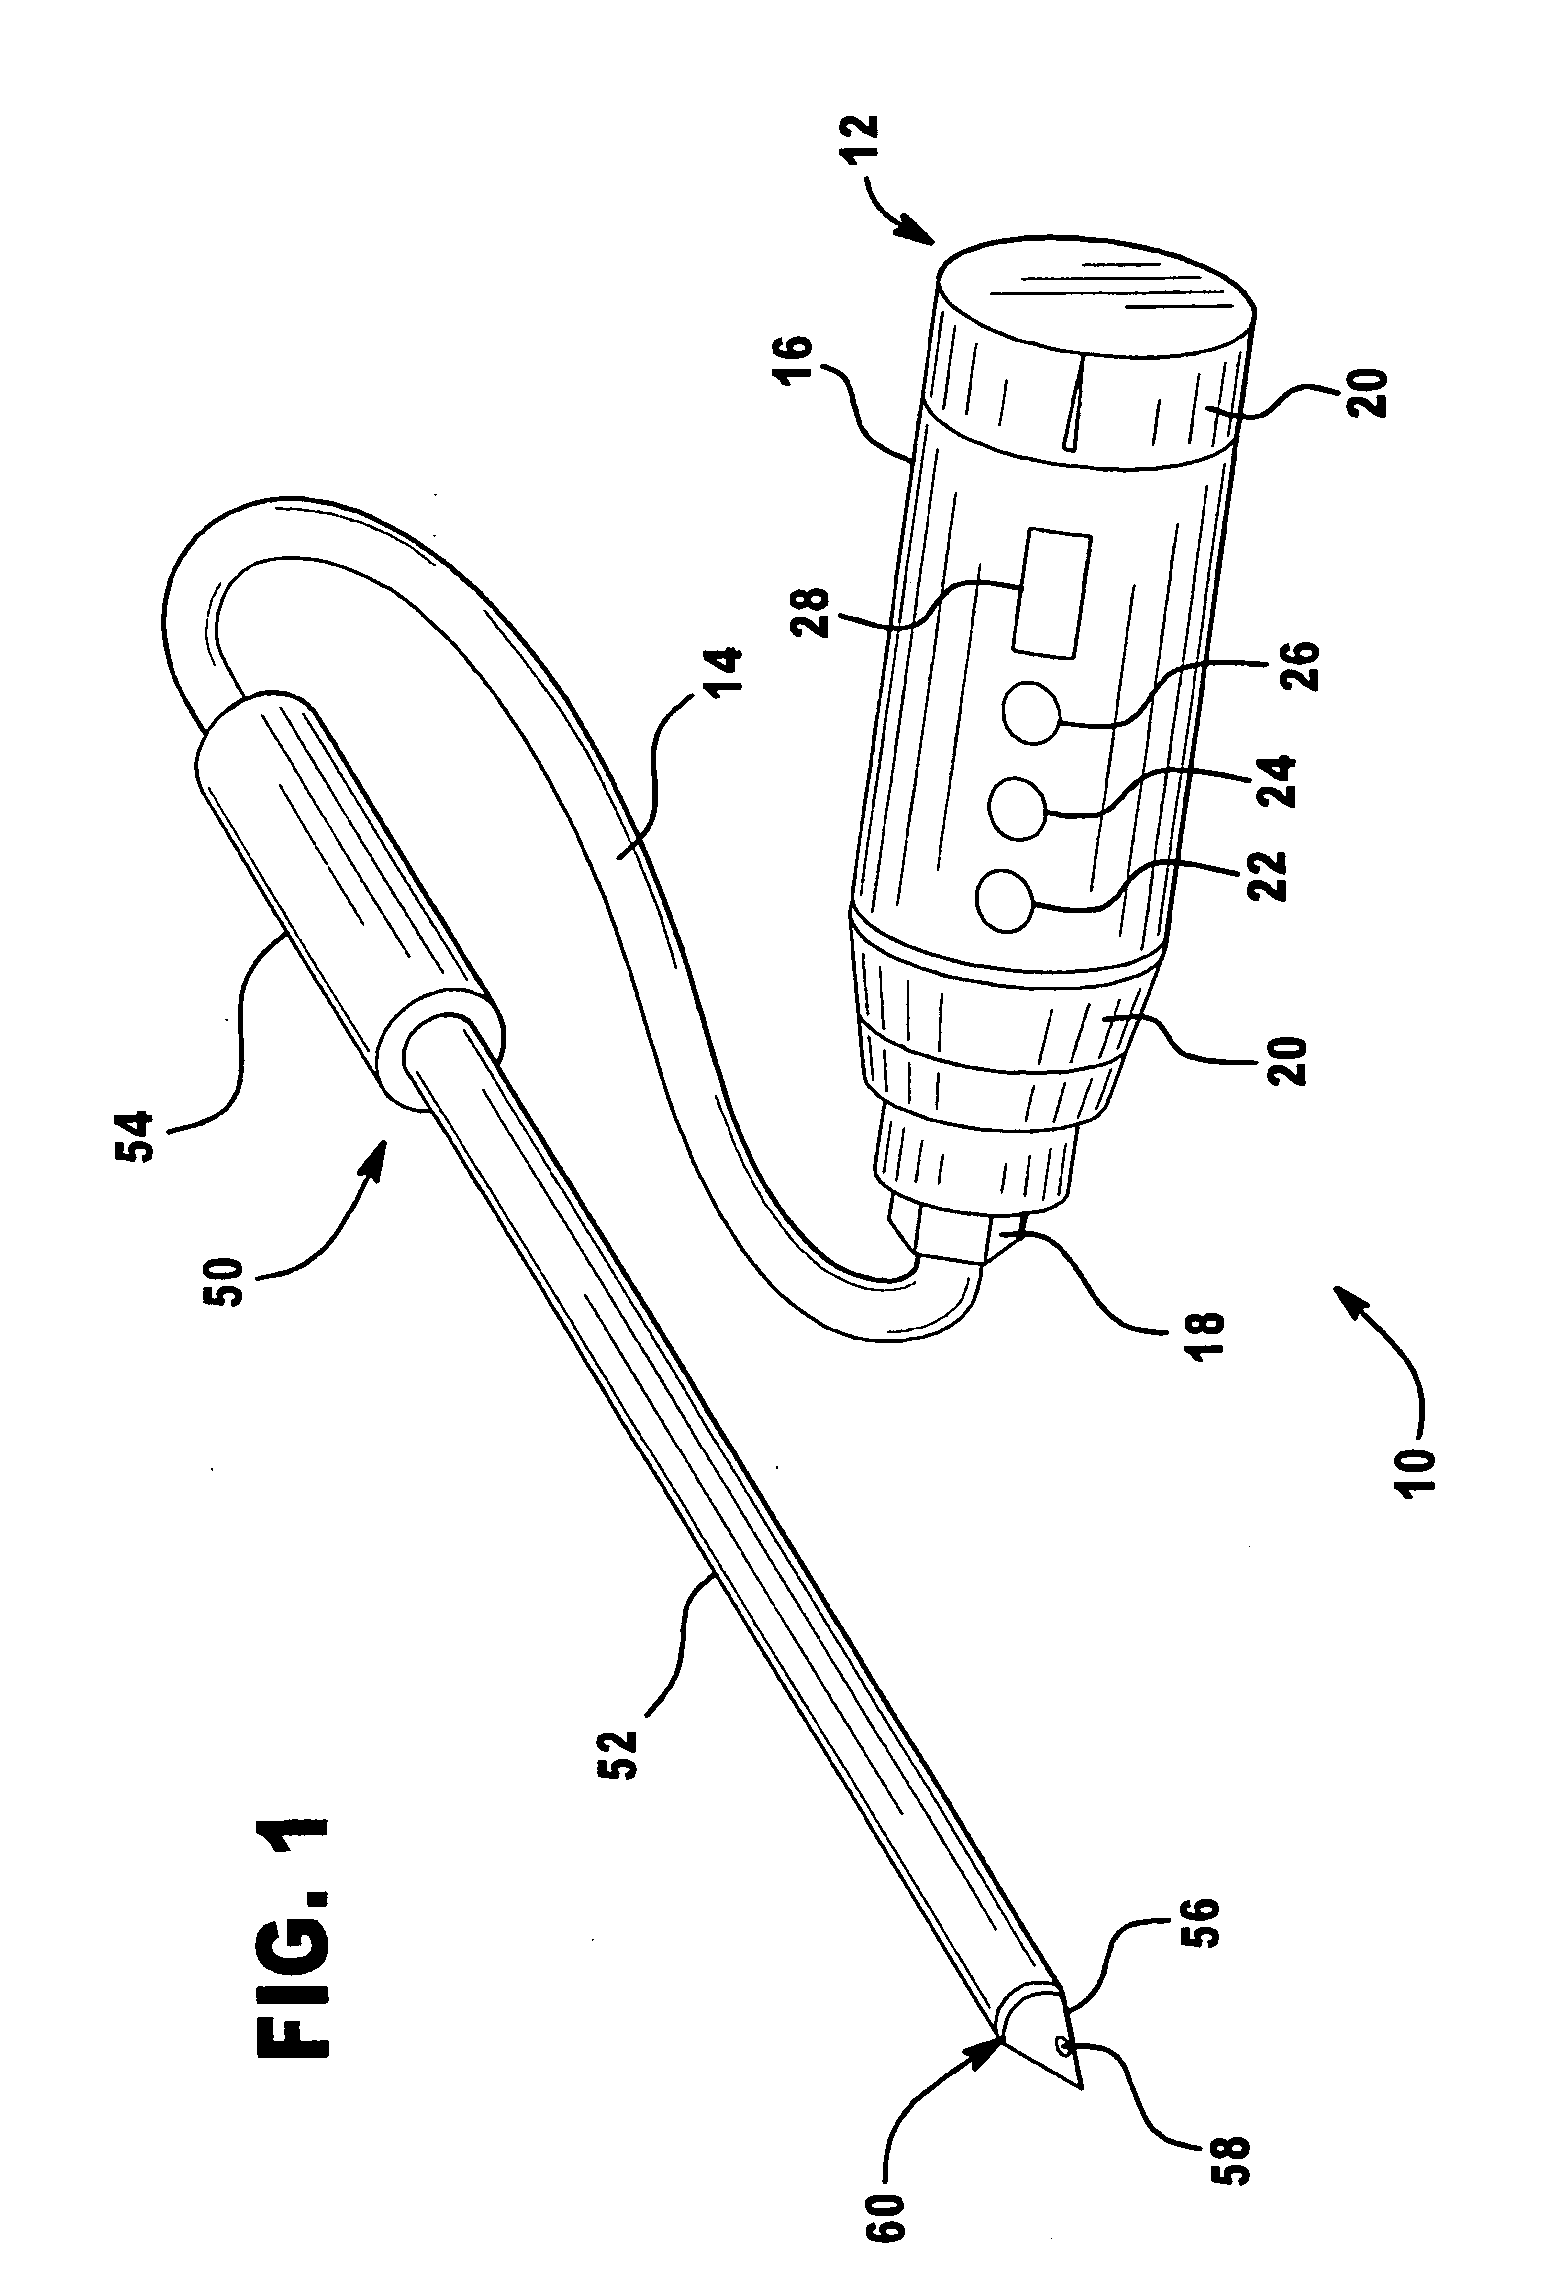 Soil probe device and method of making same